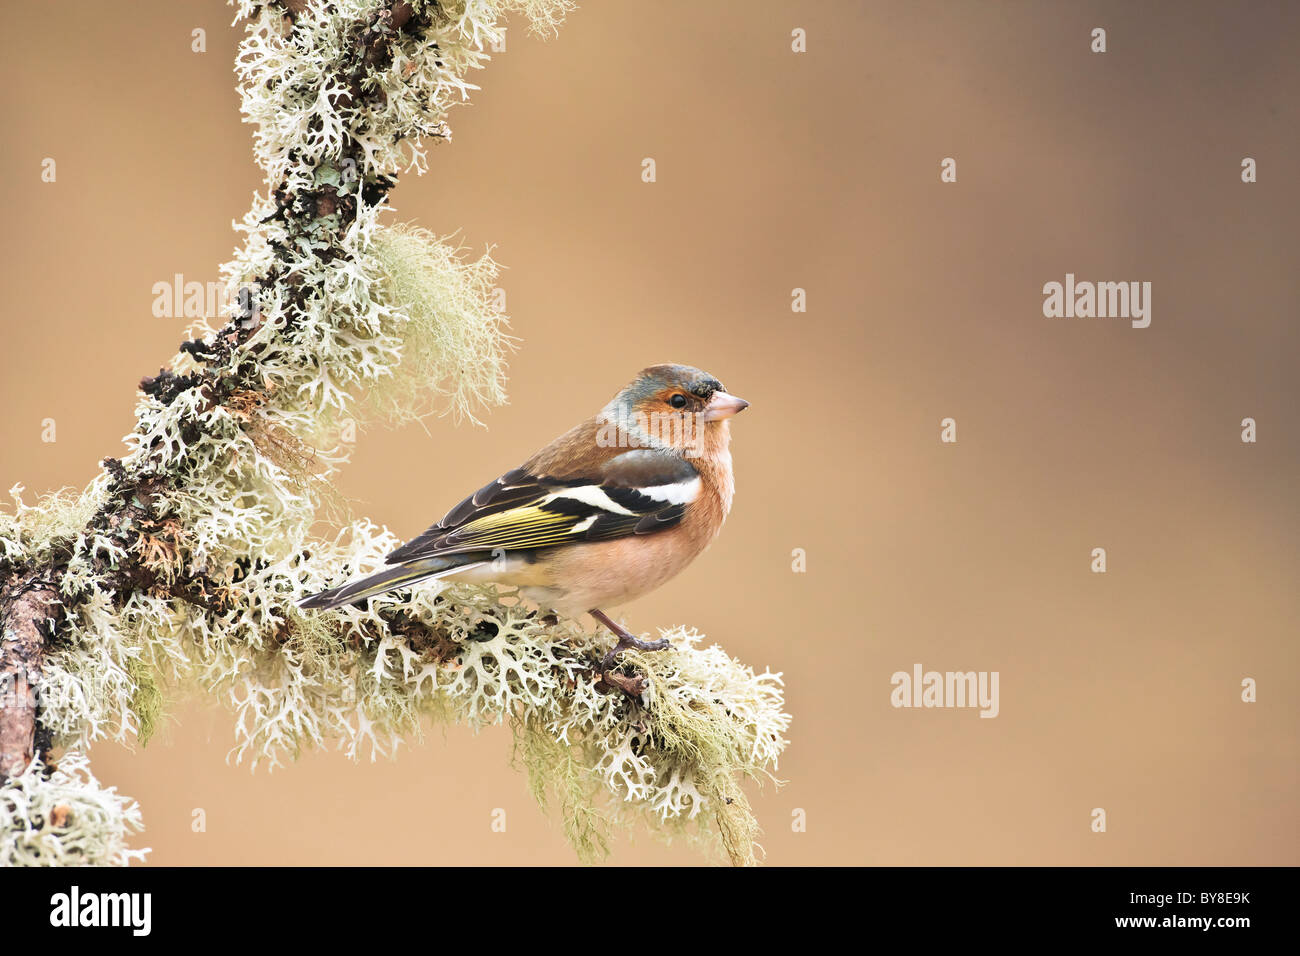 Male chaffinch on a lichen covered tree branch Stock Photo